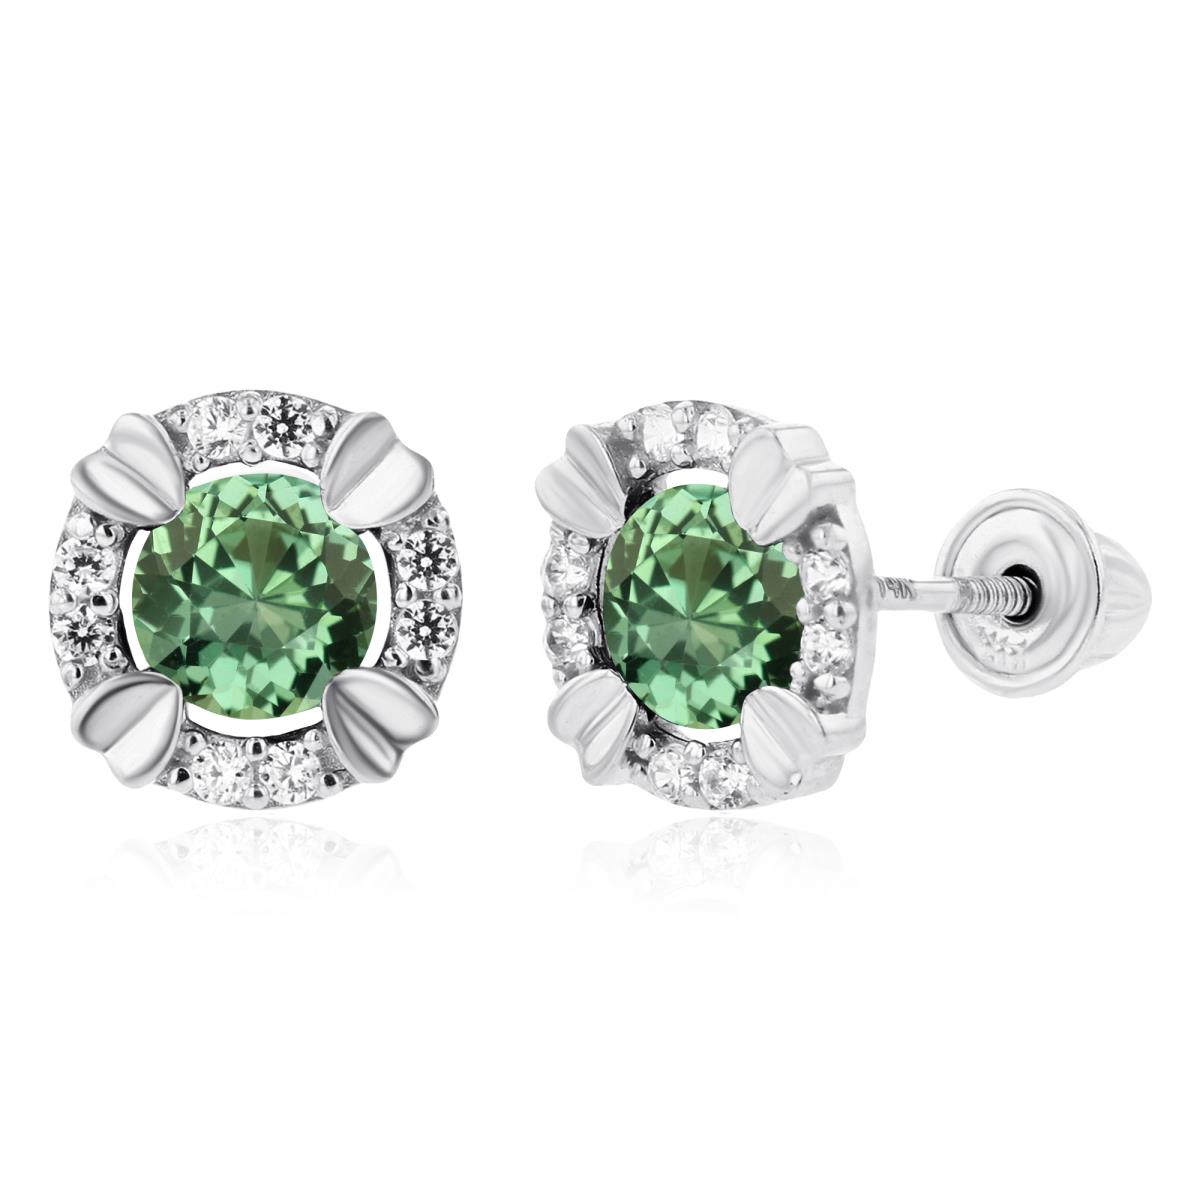 14K White Gold 4mm Round Created Green Sapphire & 1mm Created White Sapphire Halo Screwback Earrings